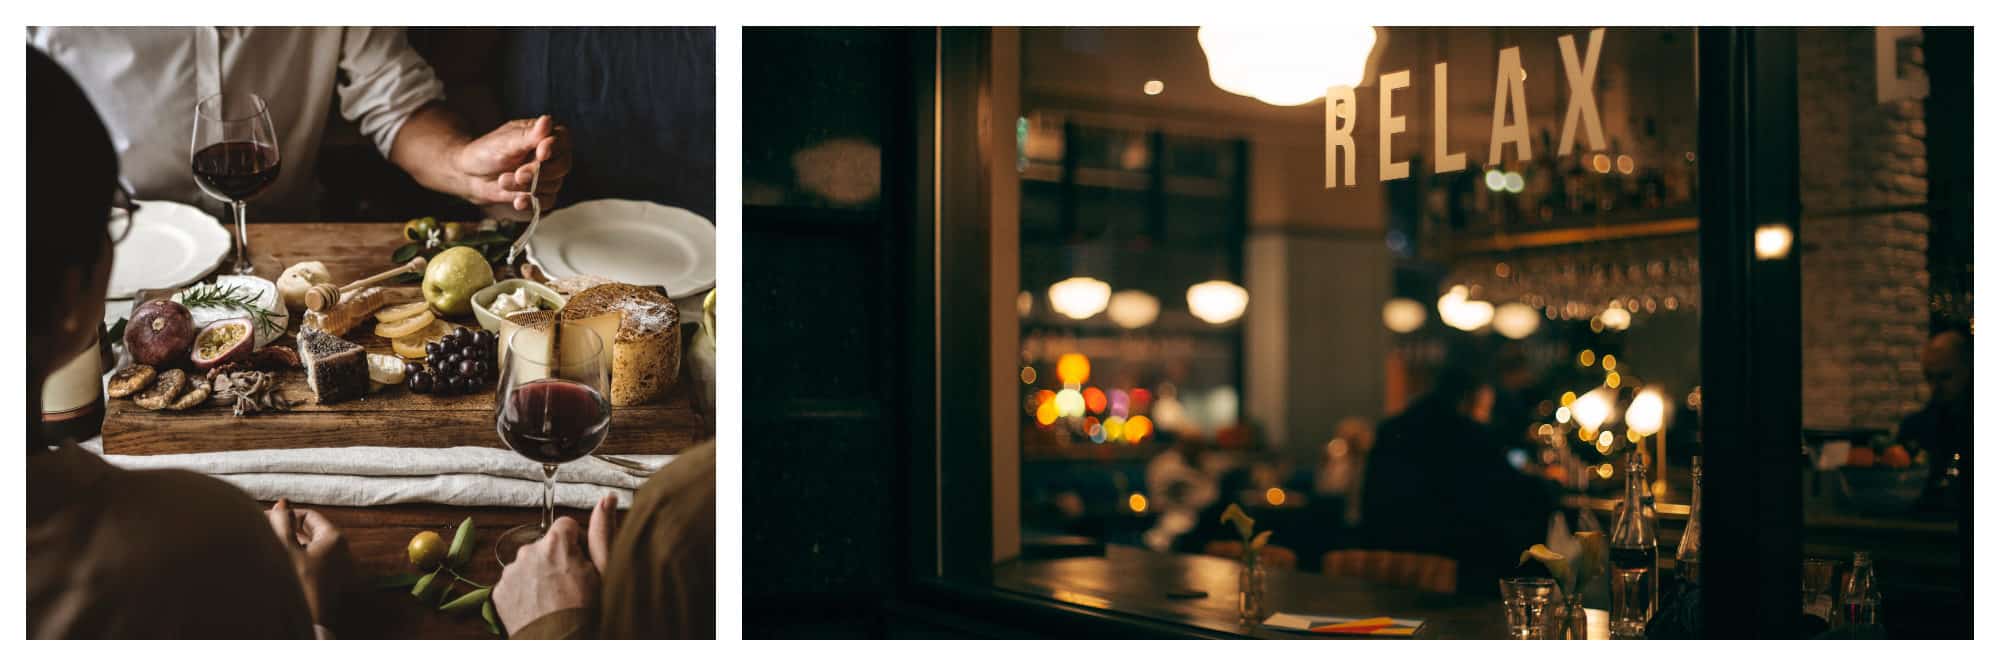 After work in Paris, locals like to enjoy ham and cheese with wine at home (left) whereas in London, people tend to head out for a drink at a bar (right).